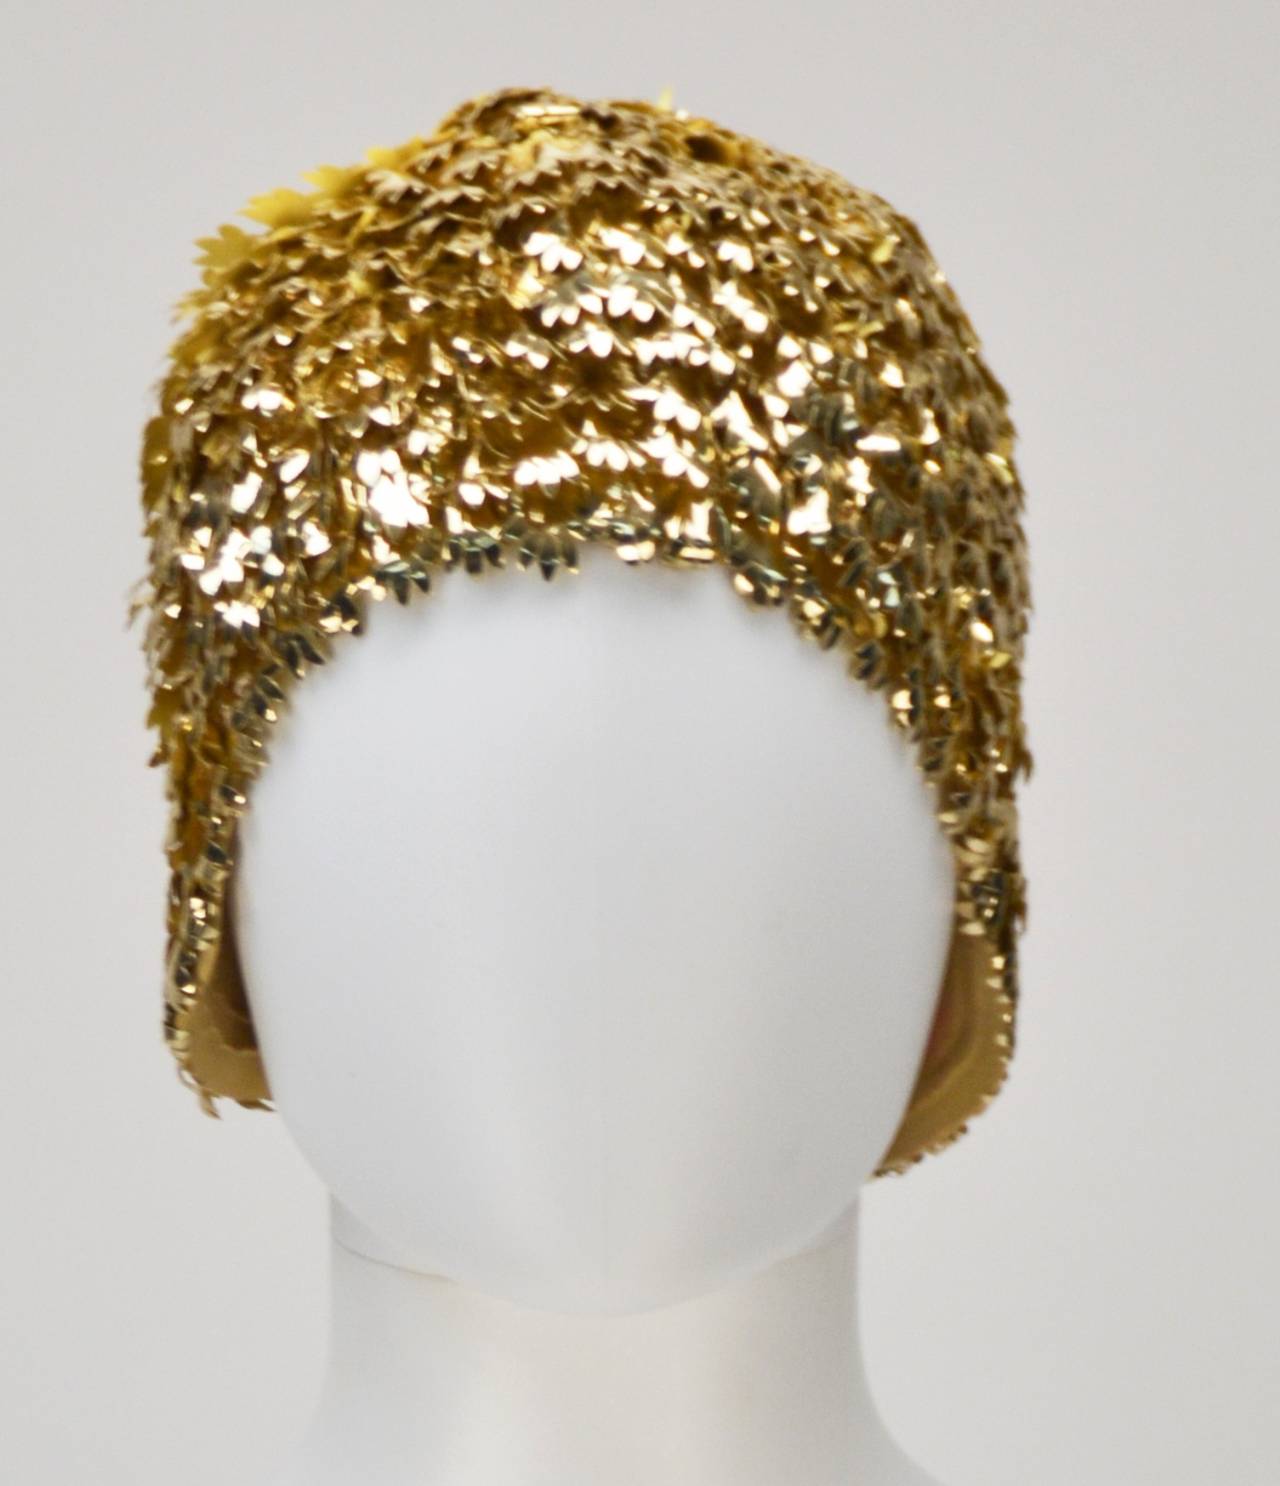 Stunning 60's -70's mod gold layered swim cap or avant-garde cloche made in Great Britain. The interioir of cap is rubber or latex. The exterior is almost tinsel-like and takes on a gorgeous layered leafy look.  Great to hide a bad hair day, for a